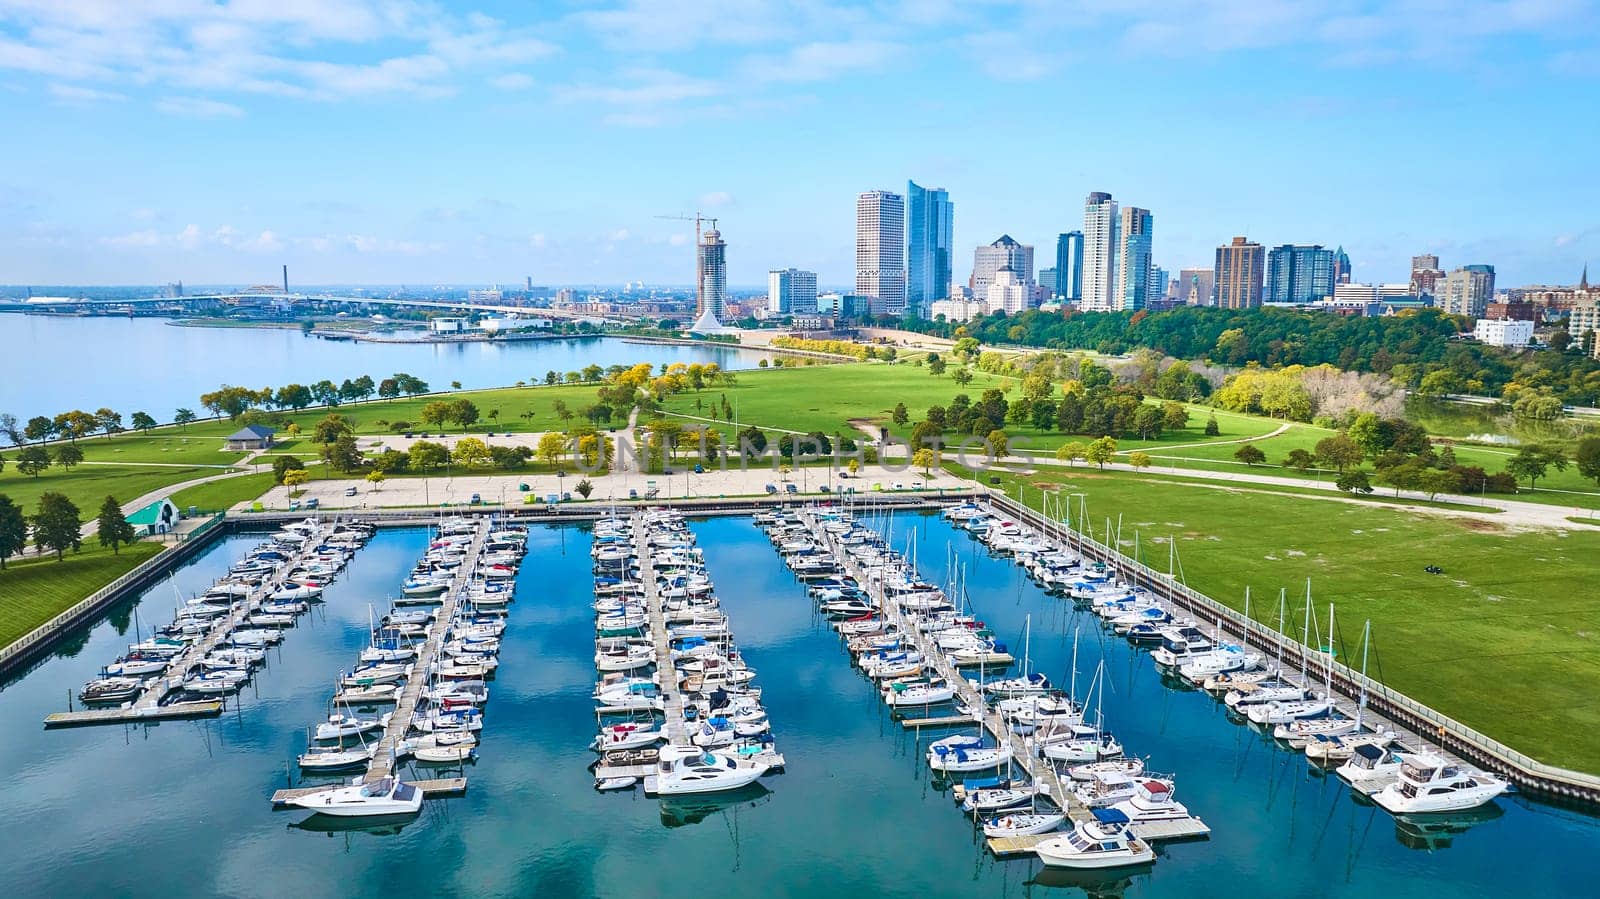 Aerial View of Marina with Sailboats by Urban Park and Skyline by njproductions